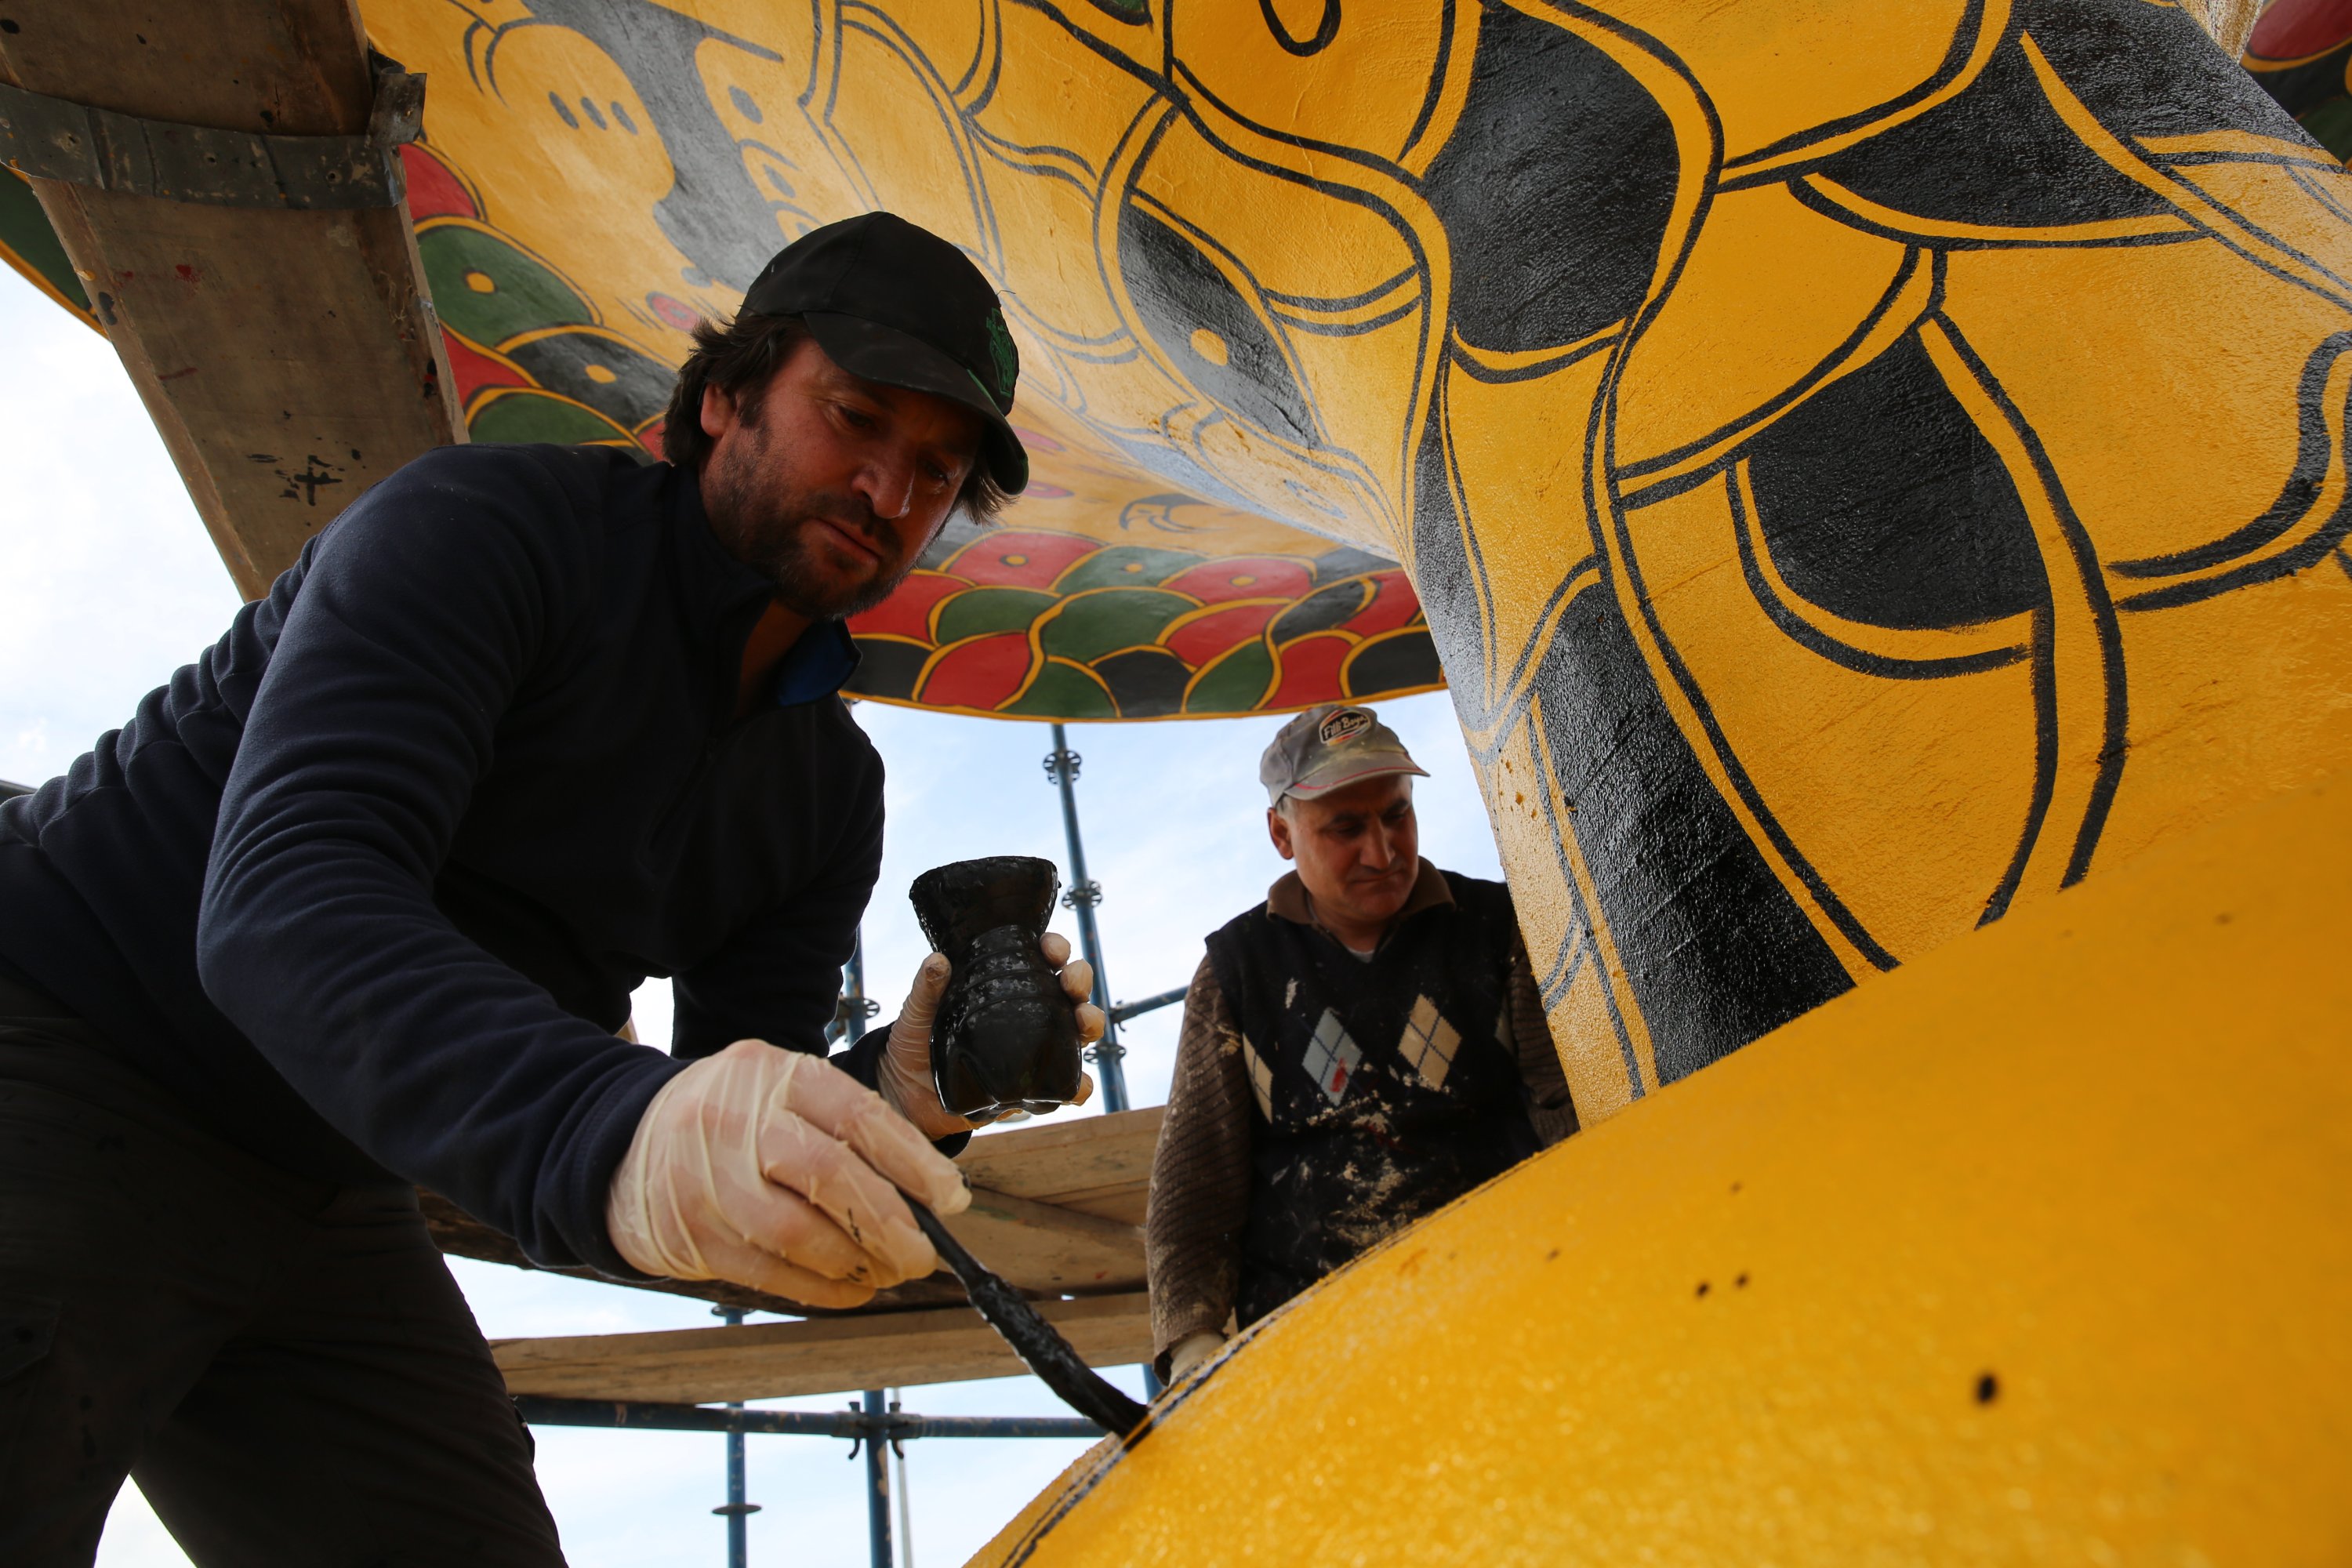 Şaban Topuz and his friend work on the jug.